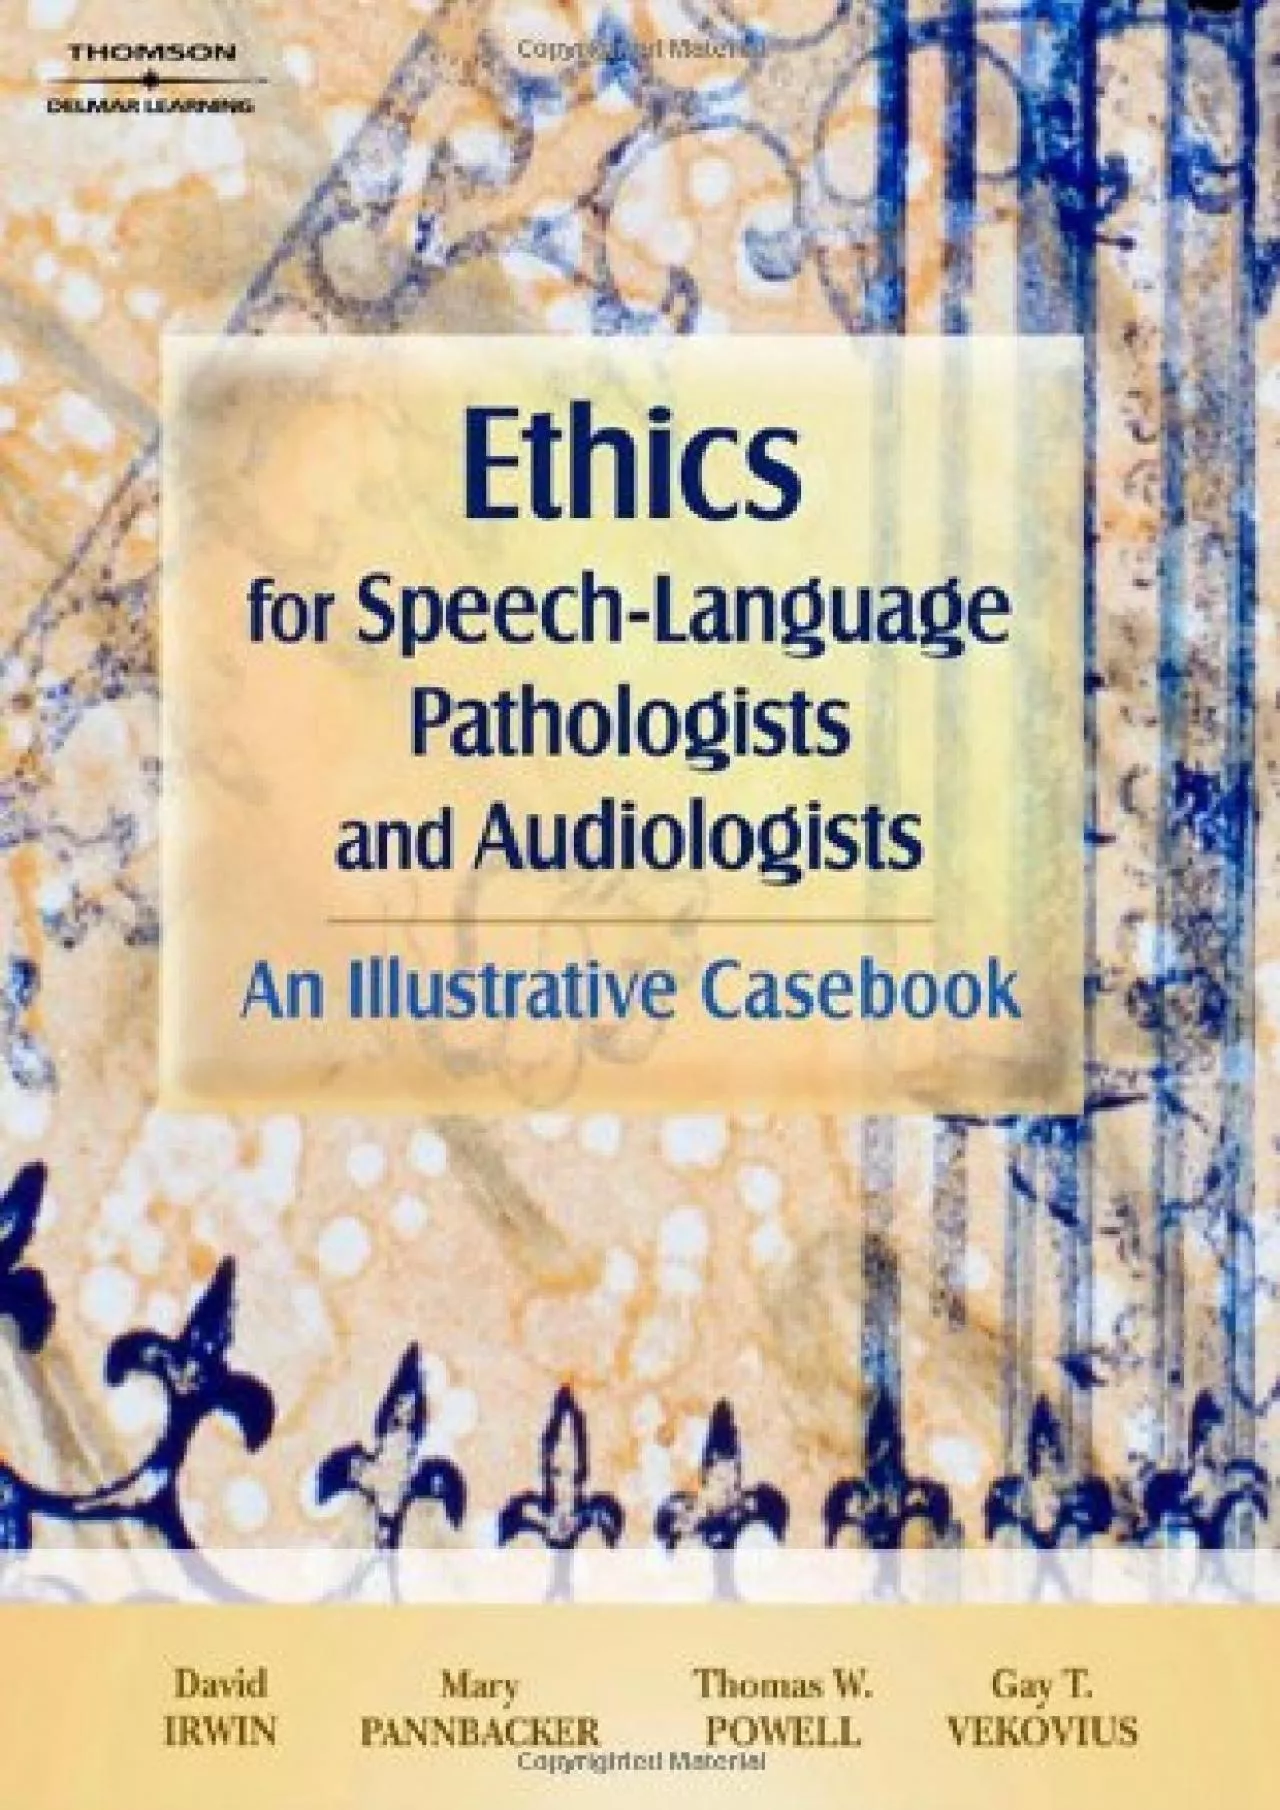 (BOOK)-Ethics for Speech-Language Pathologists and Audiologists: An Illustrative Casebook